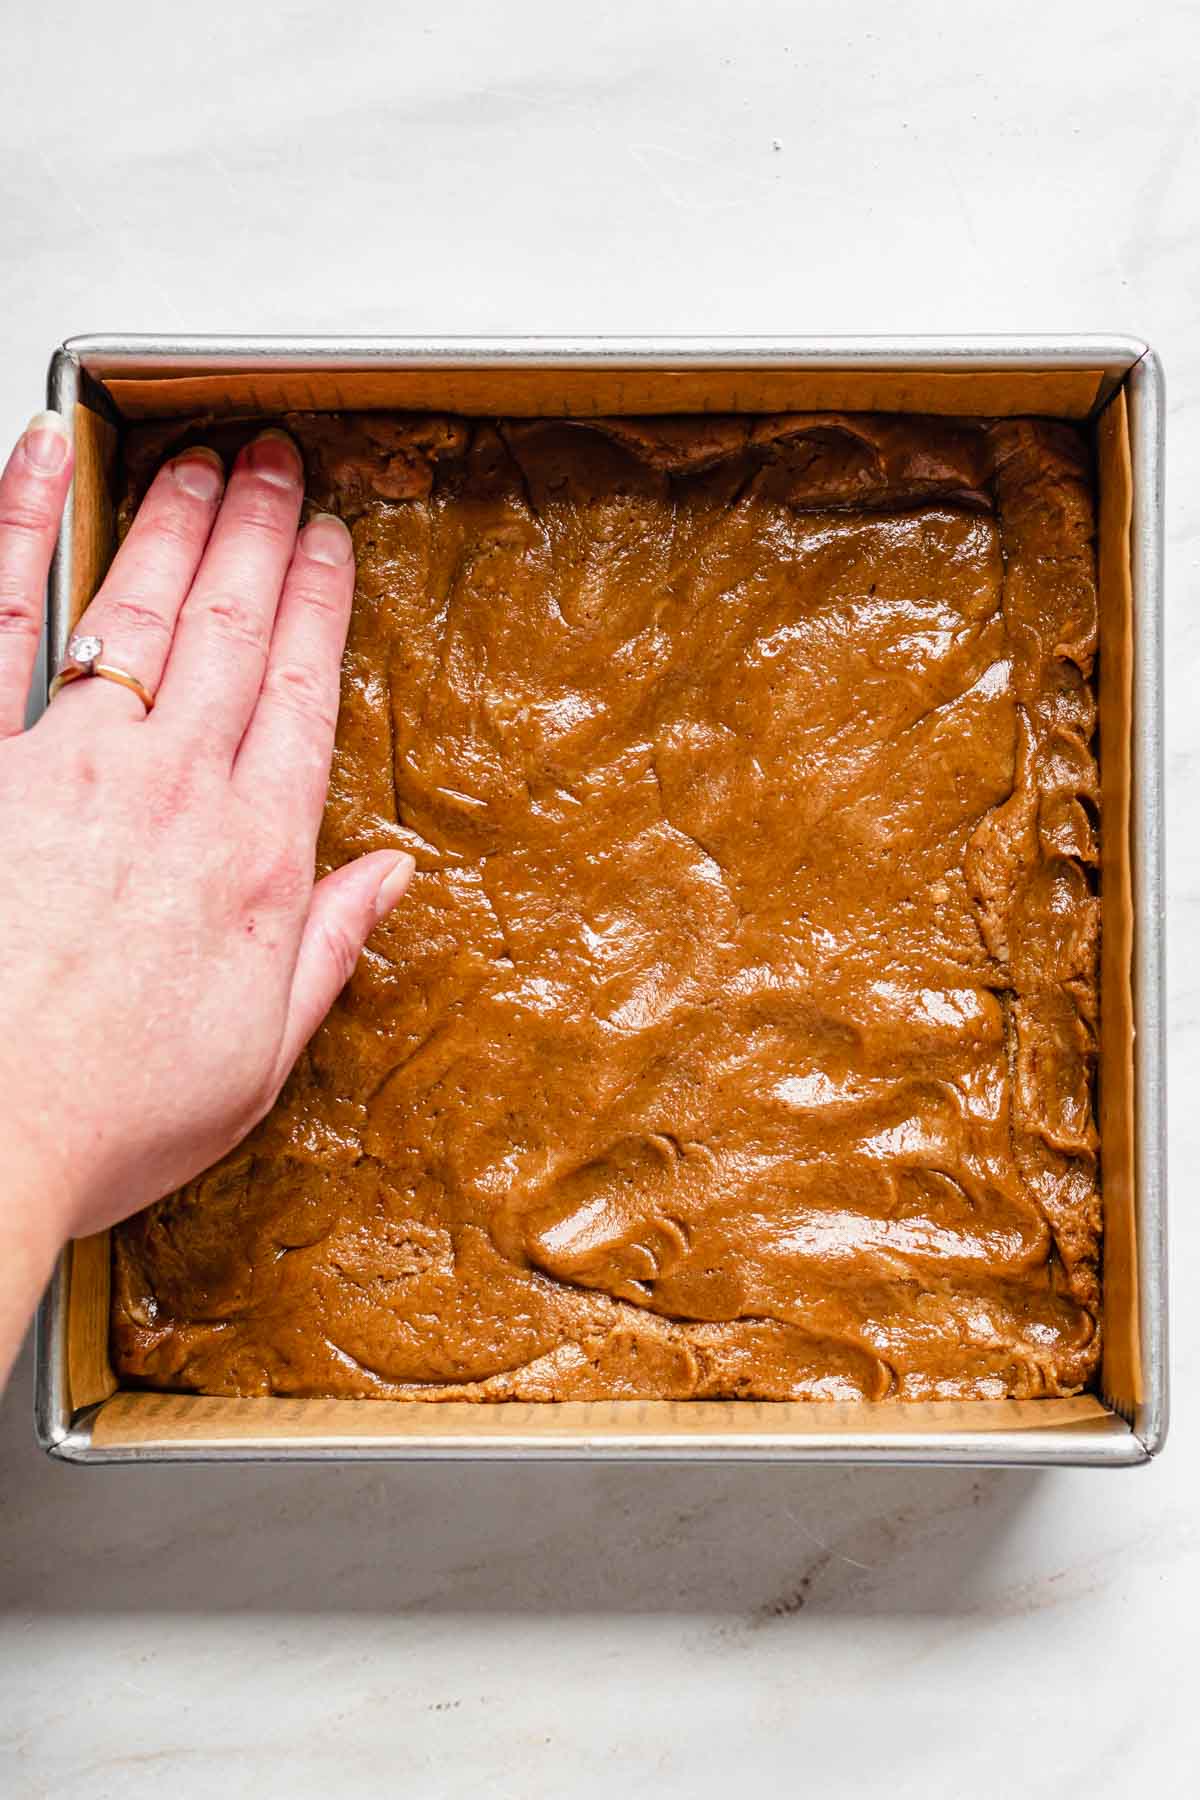 A hand presses the batter into the pan.